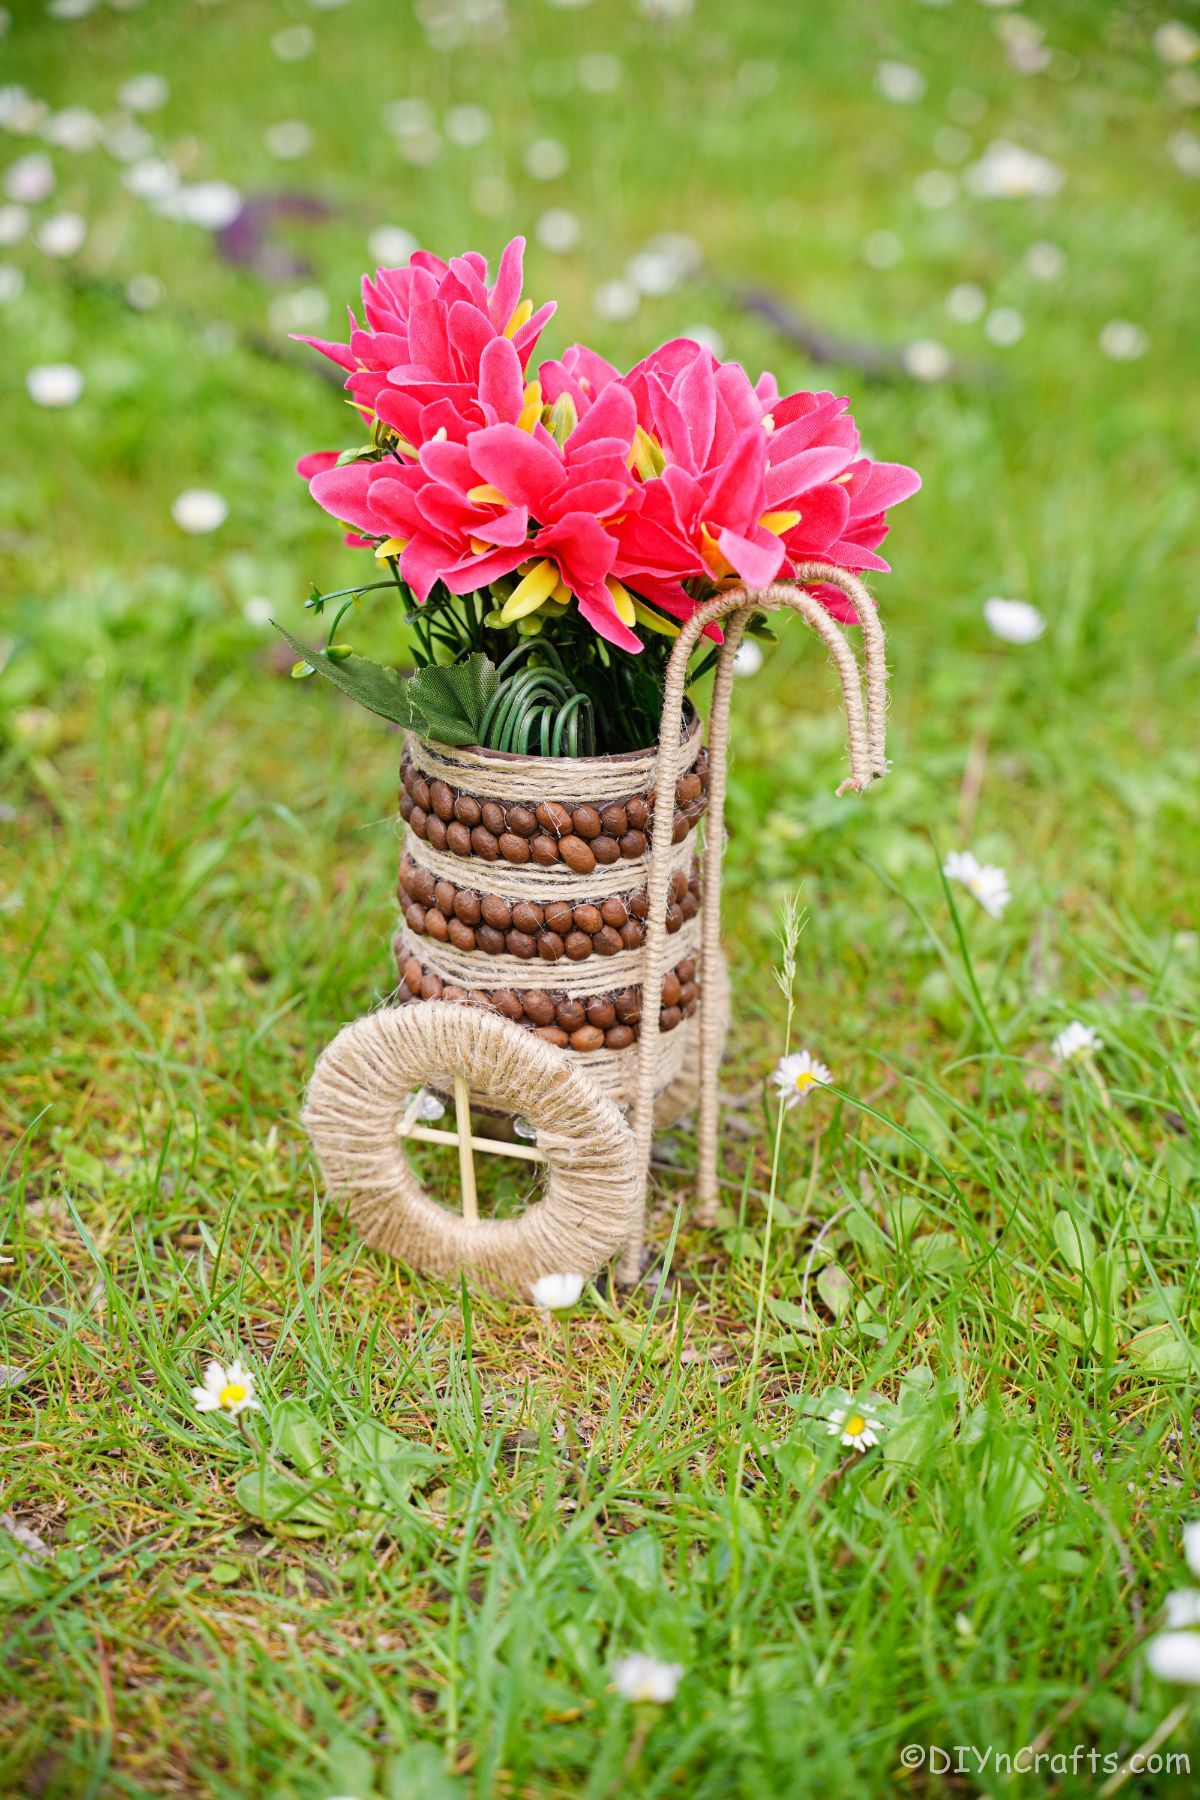 twine wrapped tin can vase with pink flowers on grass